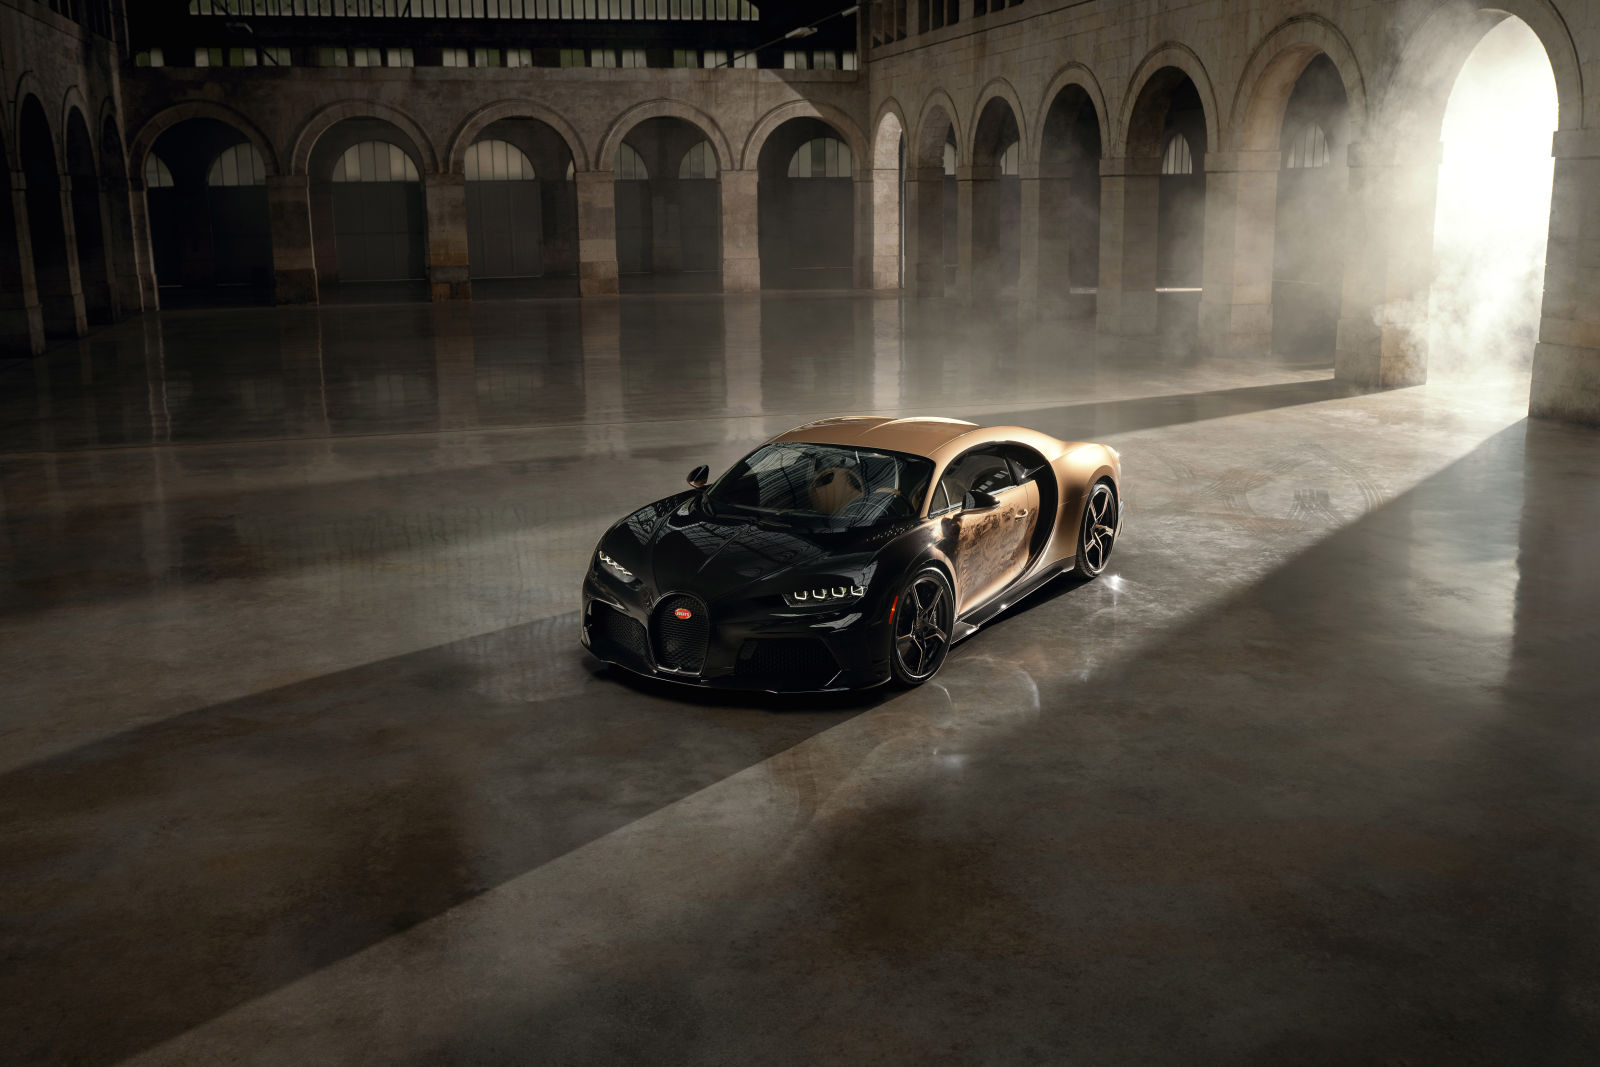 The Bugatti Chiron Super Sport ‘Golden Era’ is the pinnacle of handcrafted luxury